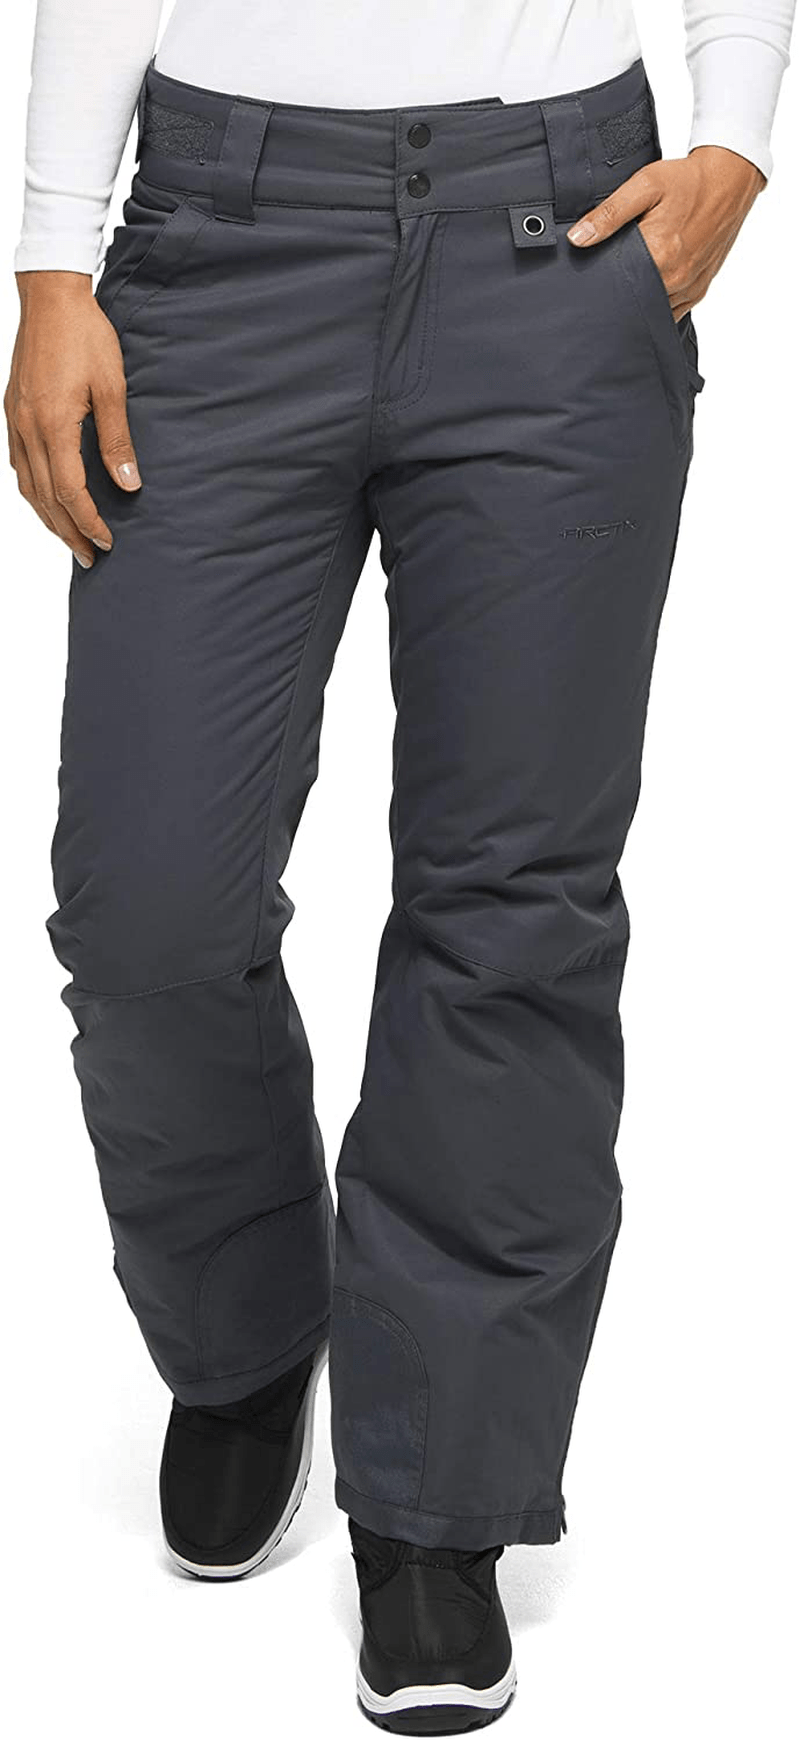 Arctix Women's Insulated Snow Pants Apparel & Accessories > Clothing > Outerwear > Snow Pants & Suits Arctix Steel 3X Tall 